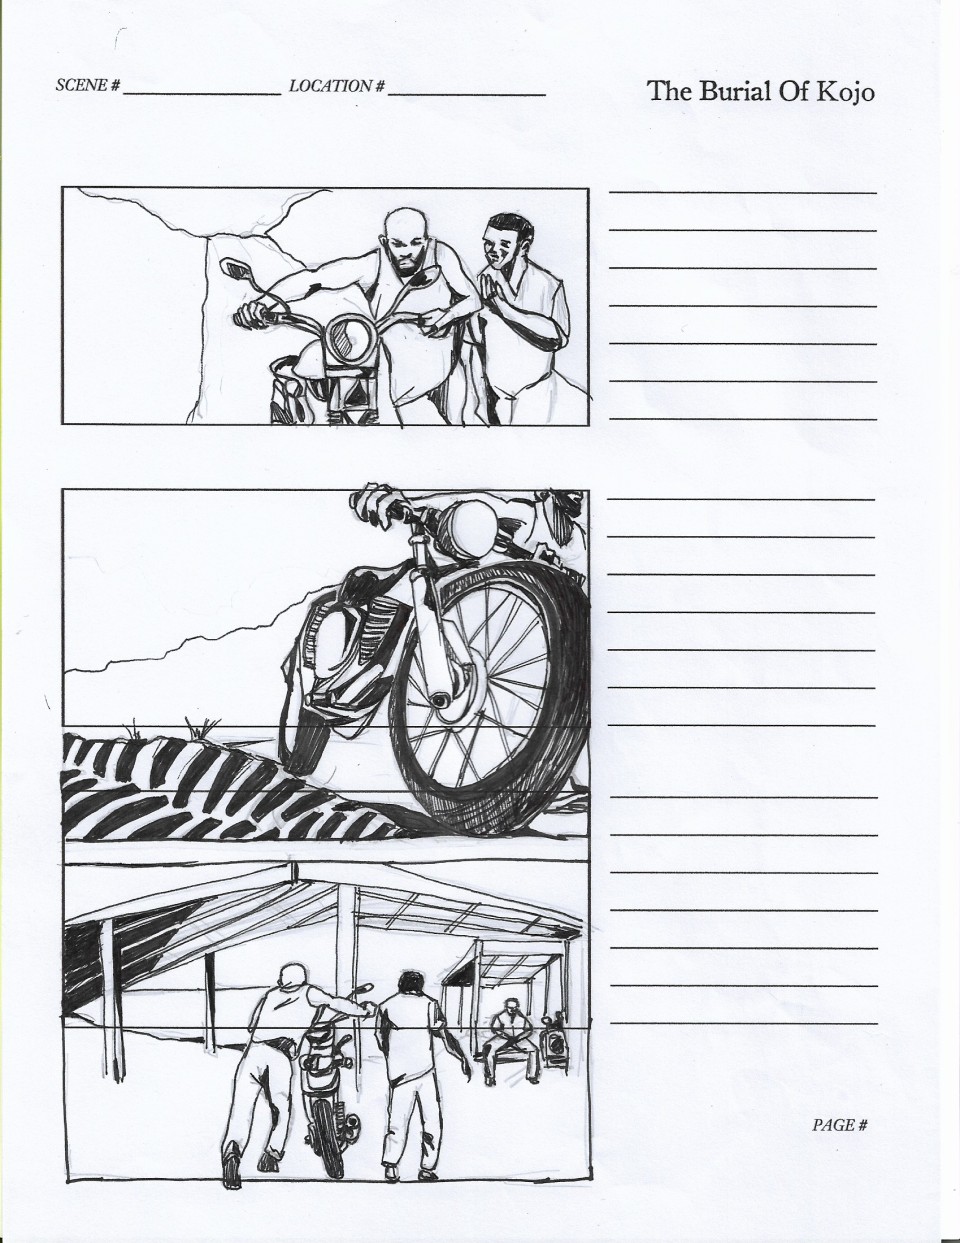 Storyboard from the film "The Burial of Kojo" shows three sketched scenes from the film. The drawings depict two men pushing a motorcycle down a road. Each of the three drawings has blank lines next to them for notes and captions.